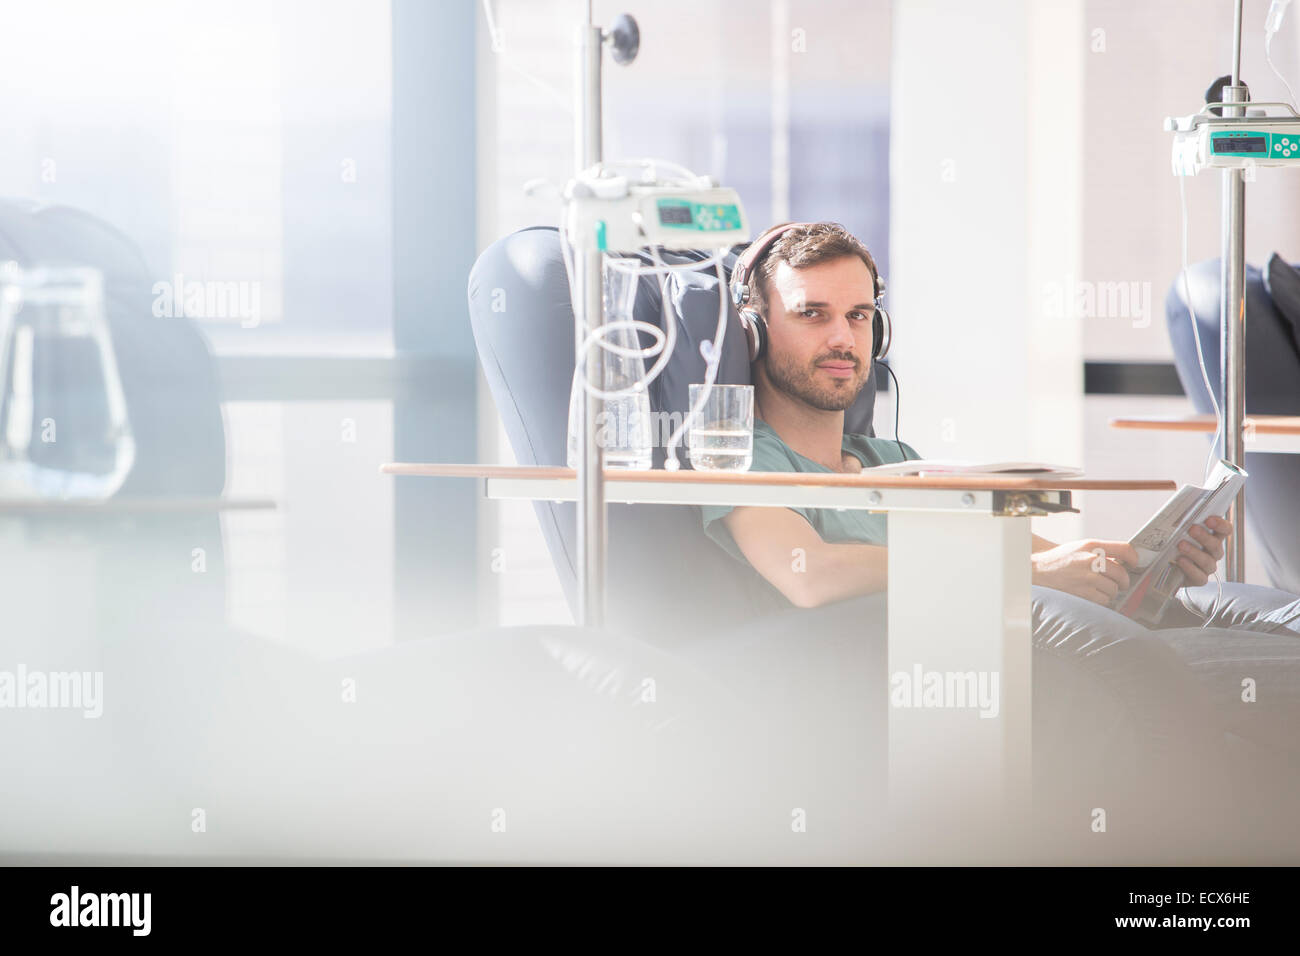 Portrait of man receiving intravenous infusion in hospital Stock Photo